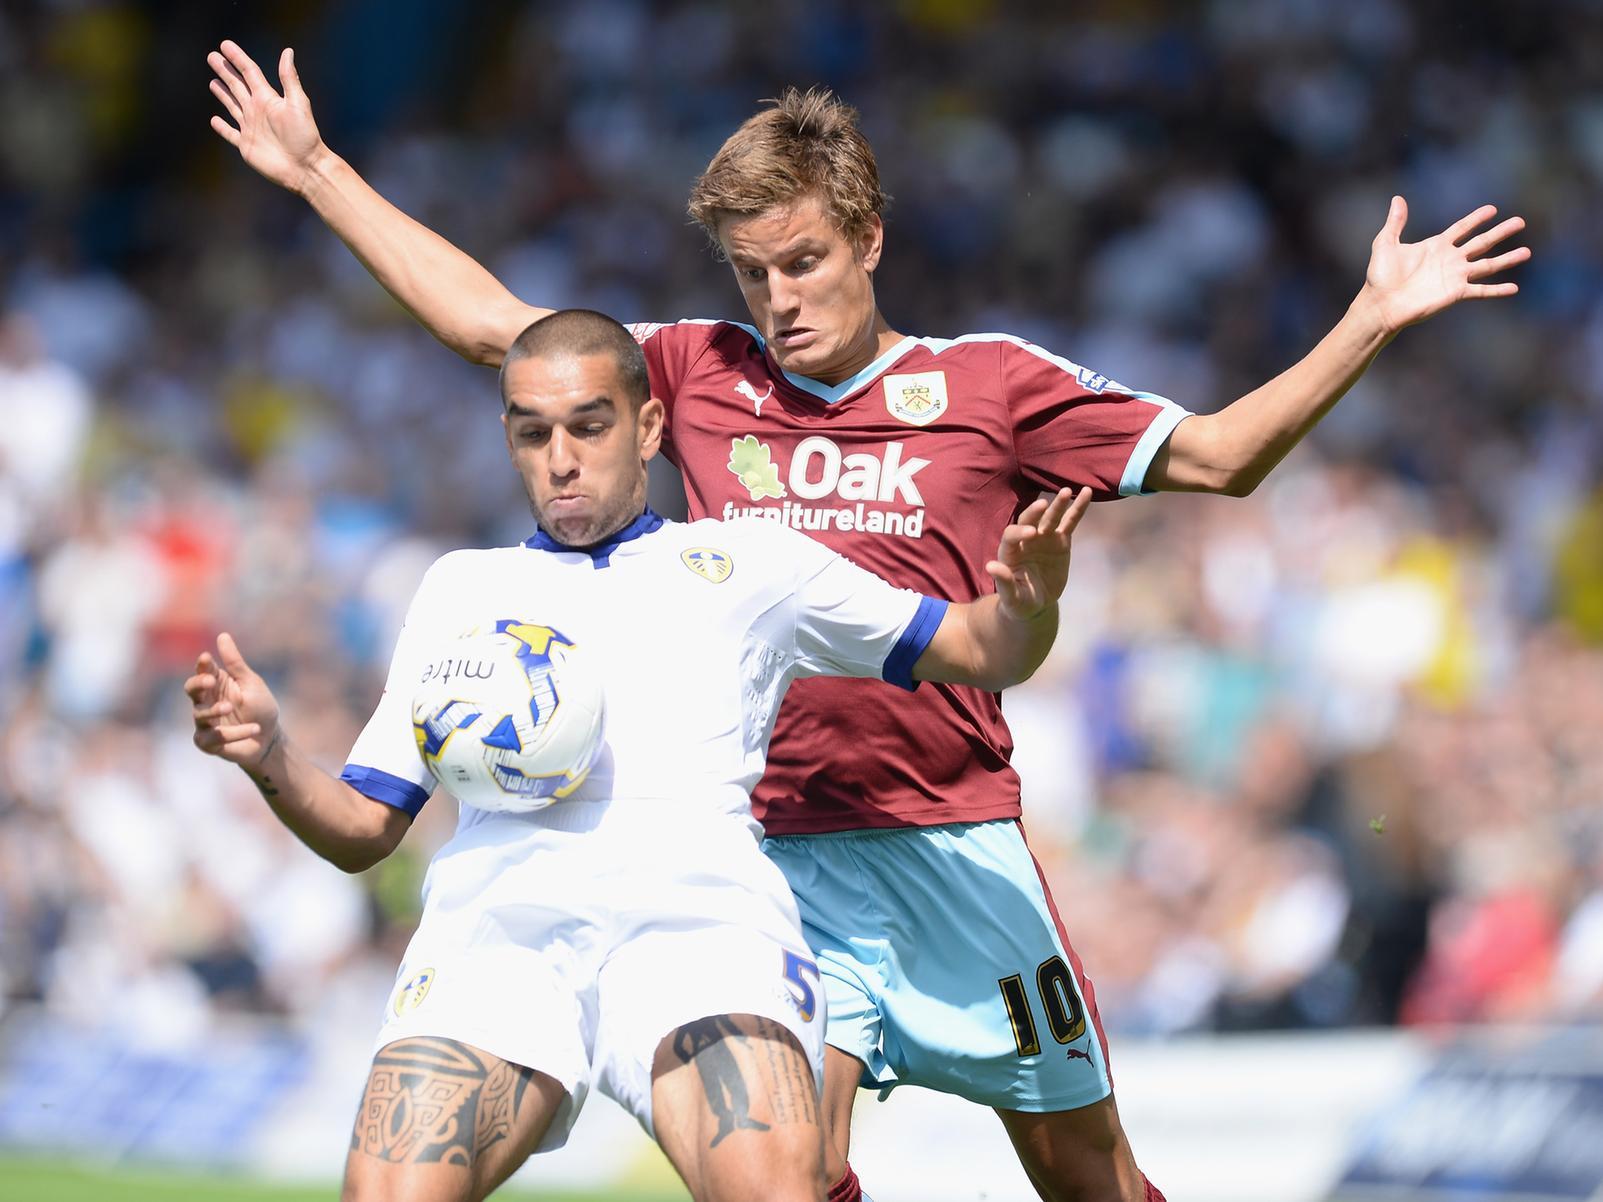 The Belgian striker was brought to Turf Moor from Genk in July 2015, but he had returned to his homeland by the end of August. Vossen made three league starts before cutting his stay short and signing for Club Brugge.